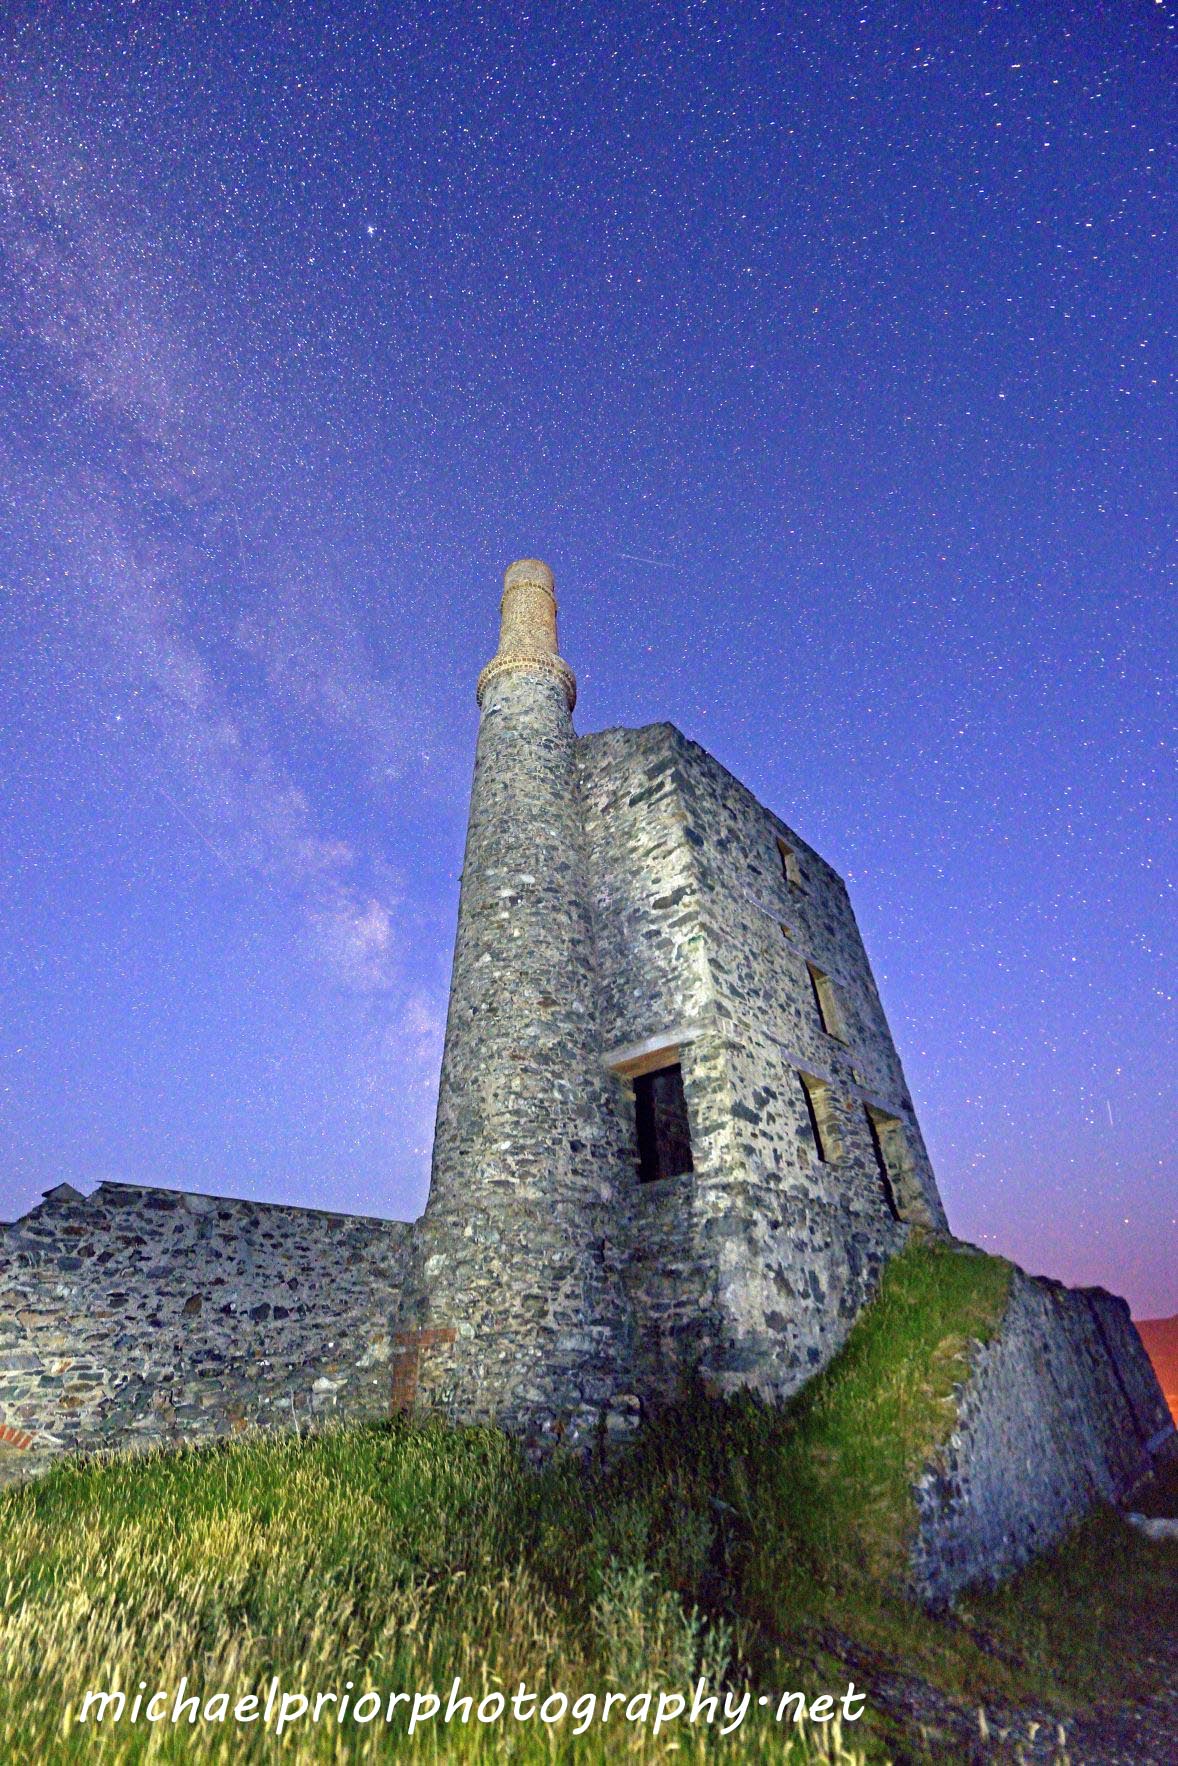 The old mill at Allihies in west Cork